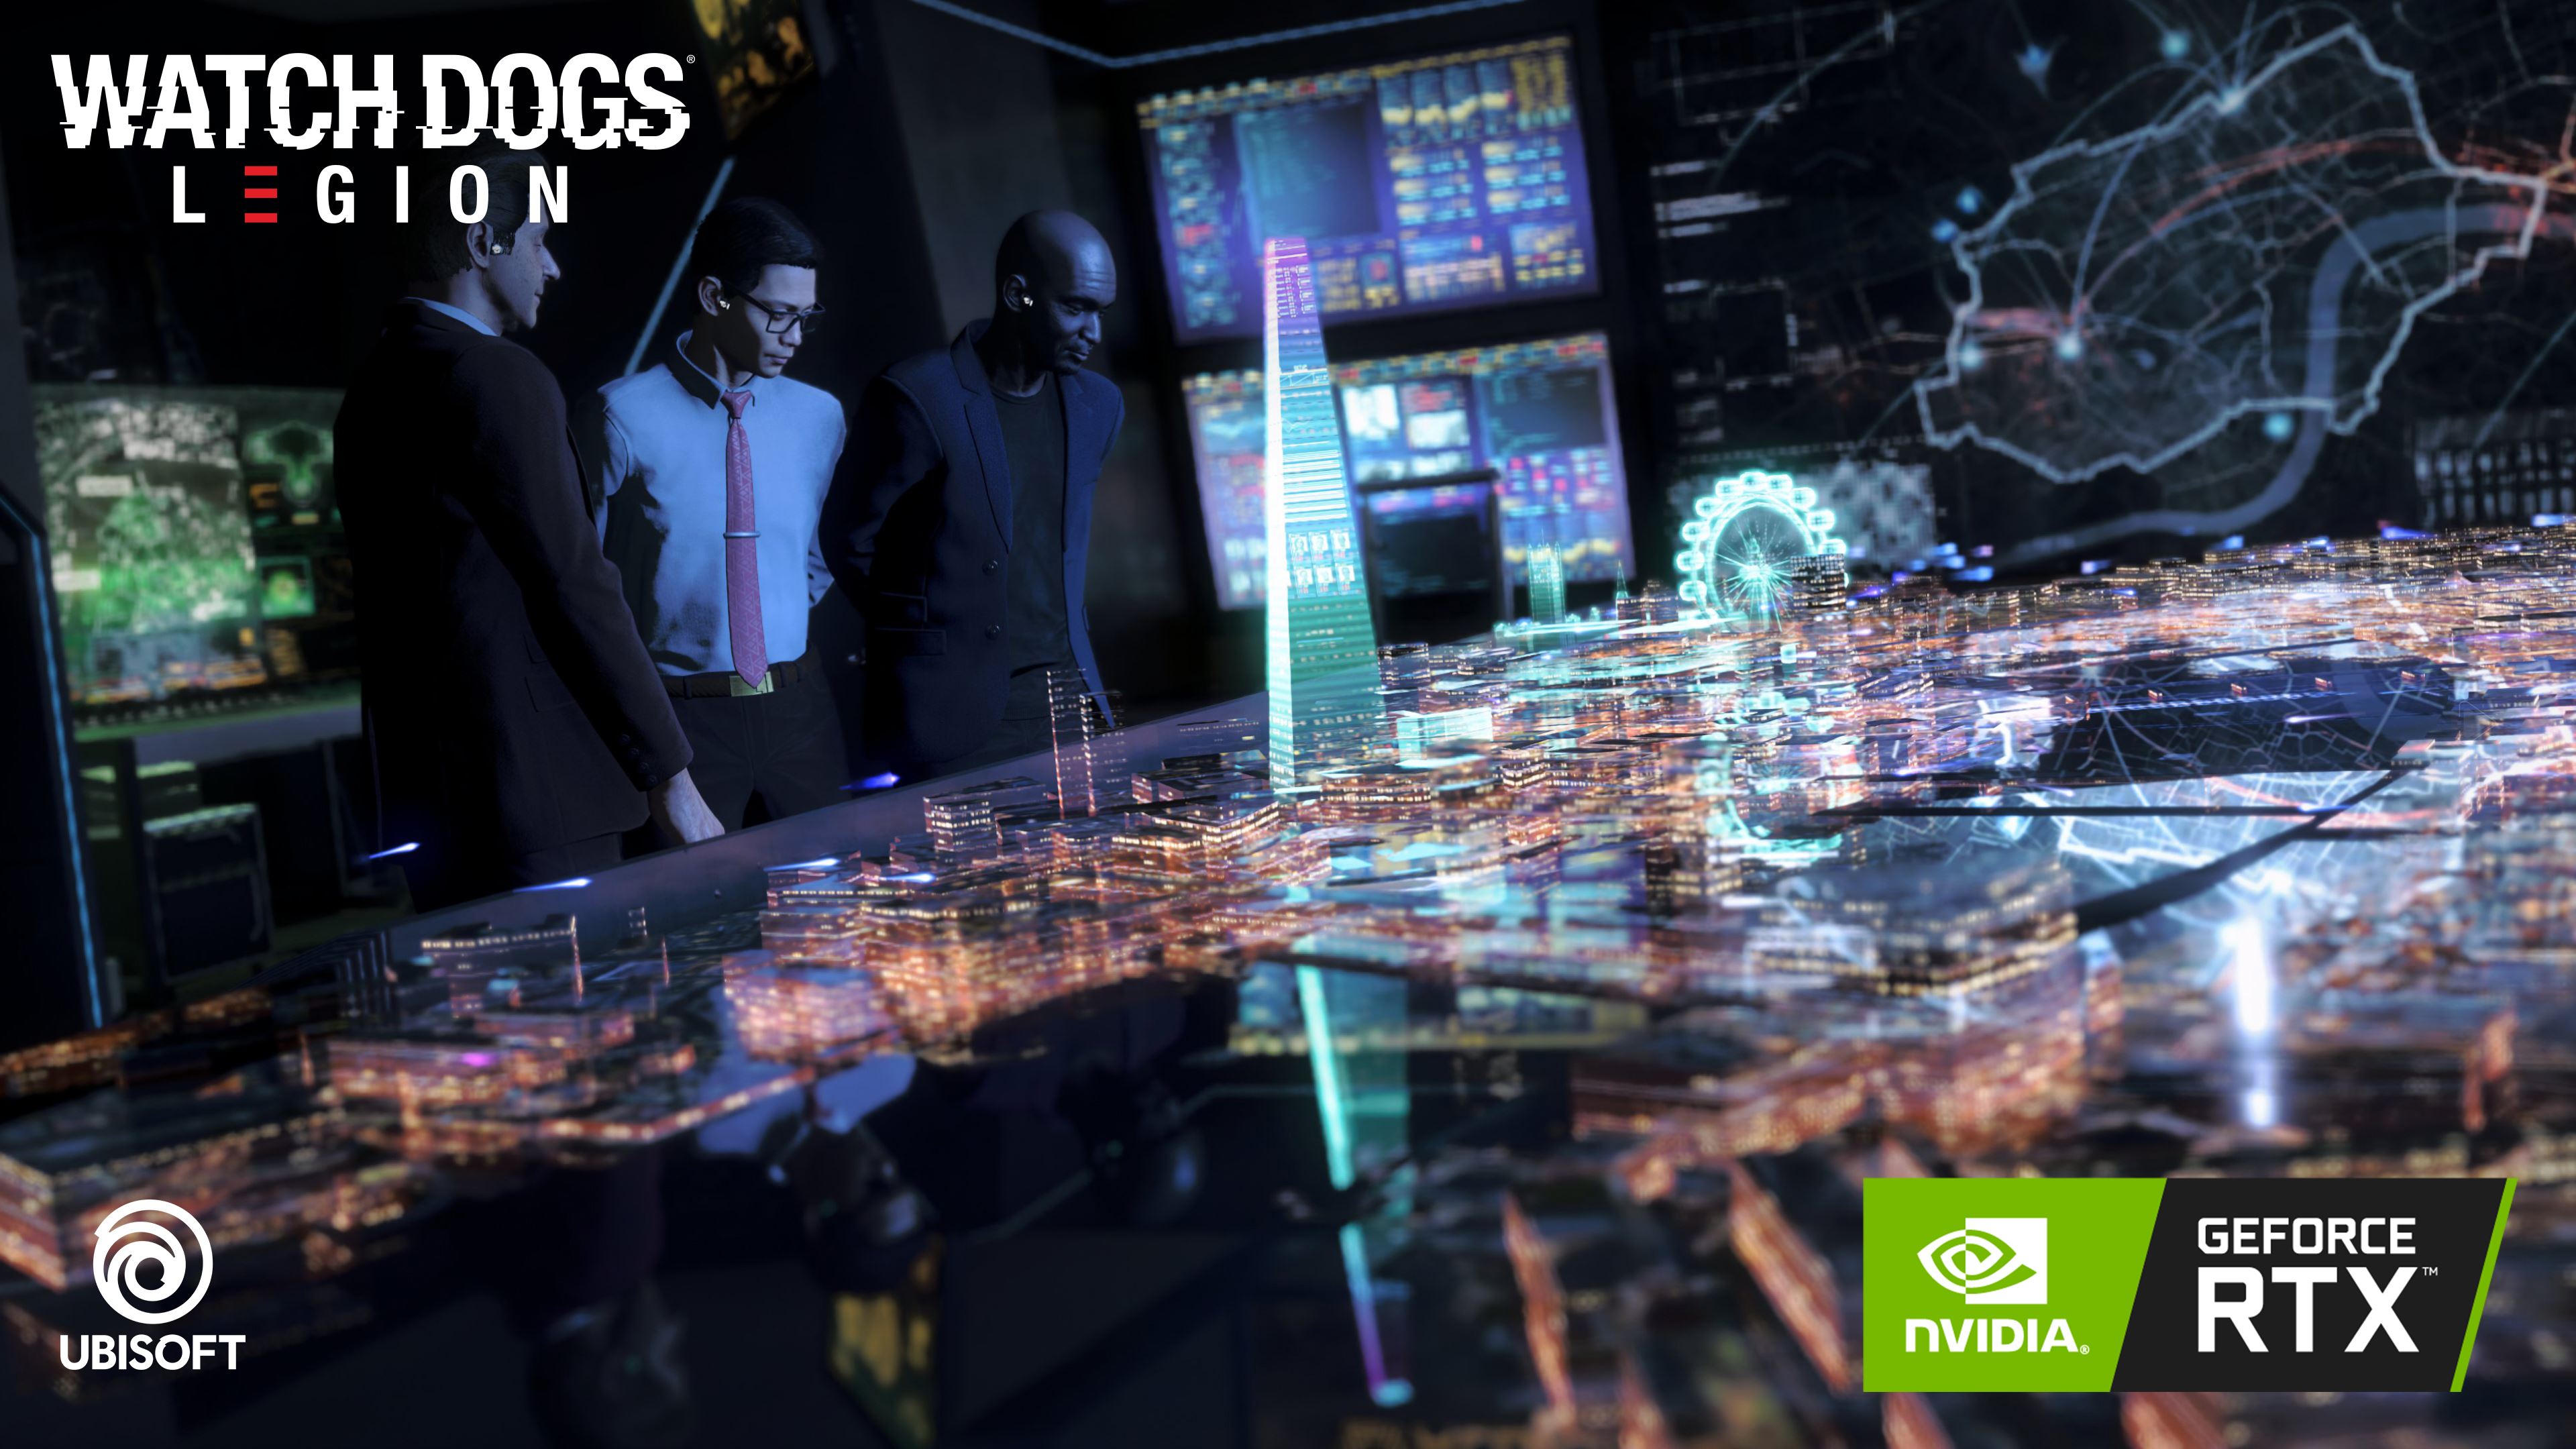 Image showing scene from Watch Dogs Legion videogame